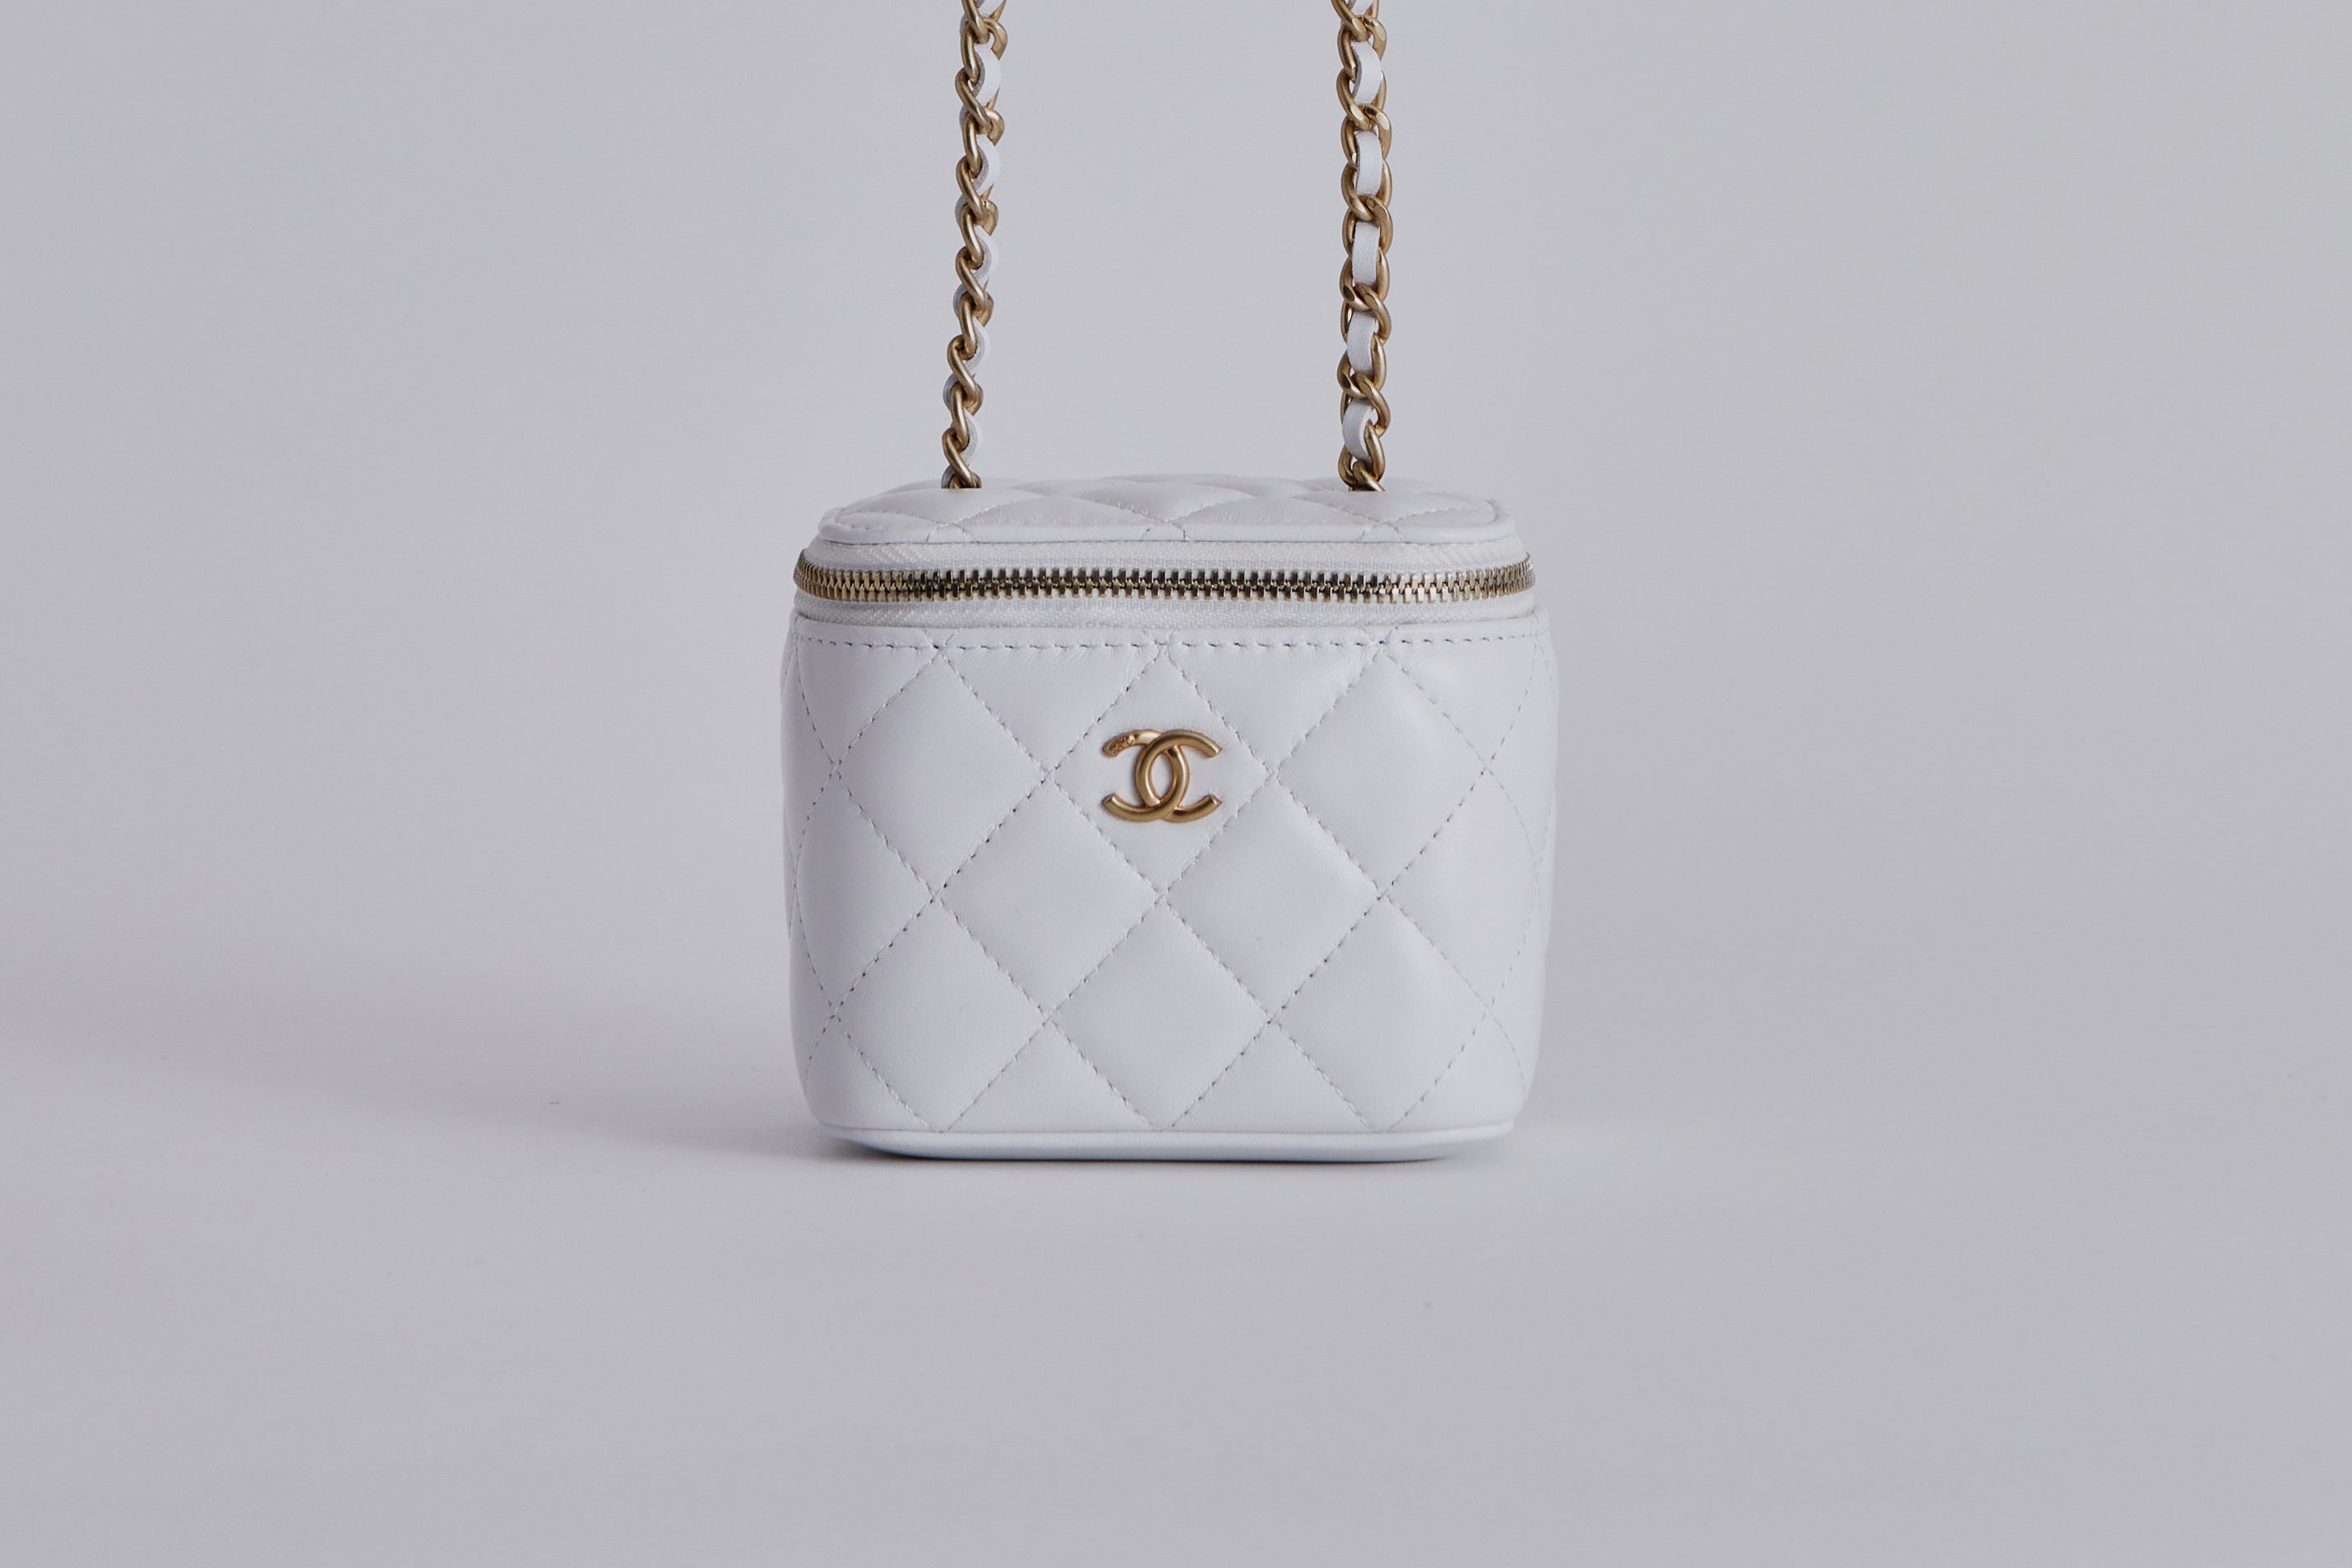 Chanel 21S Iridescent White Mini Flap Rectangle CC Quilted Chain Crossbody  Bag | eBay